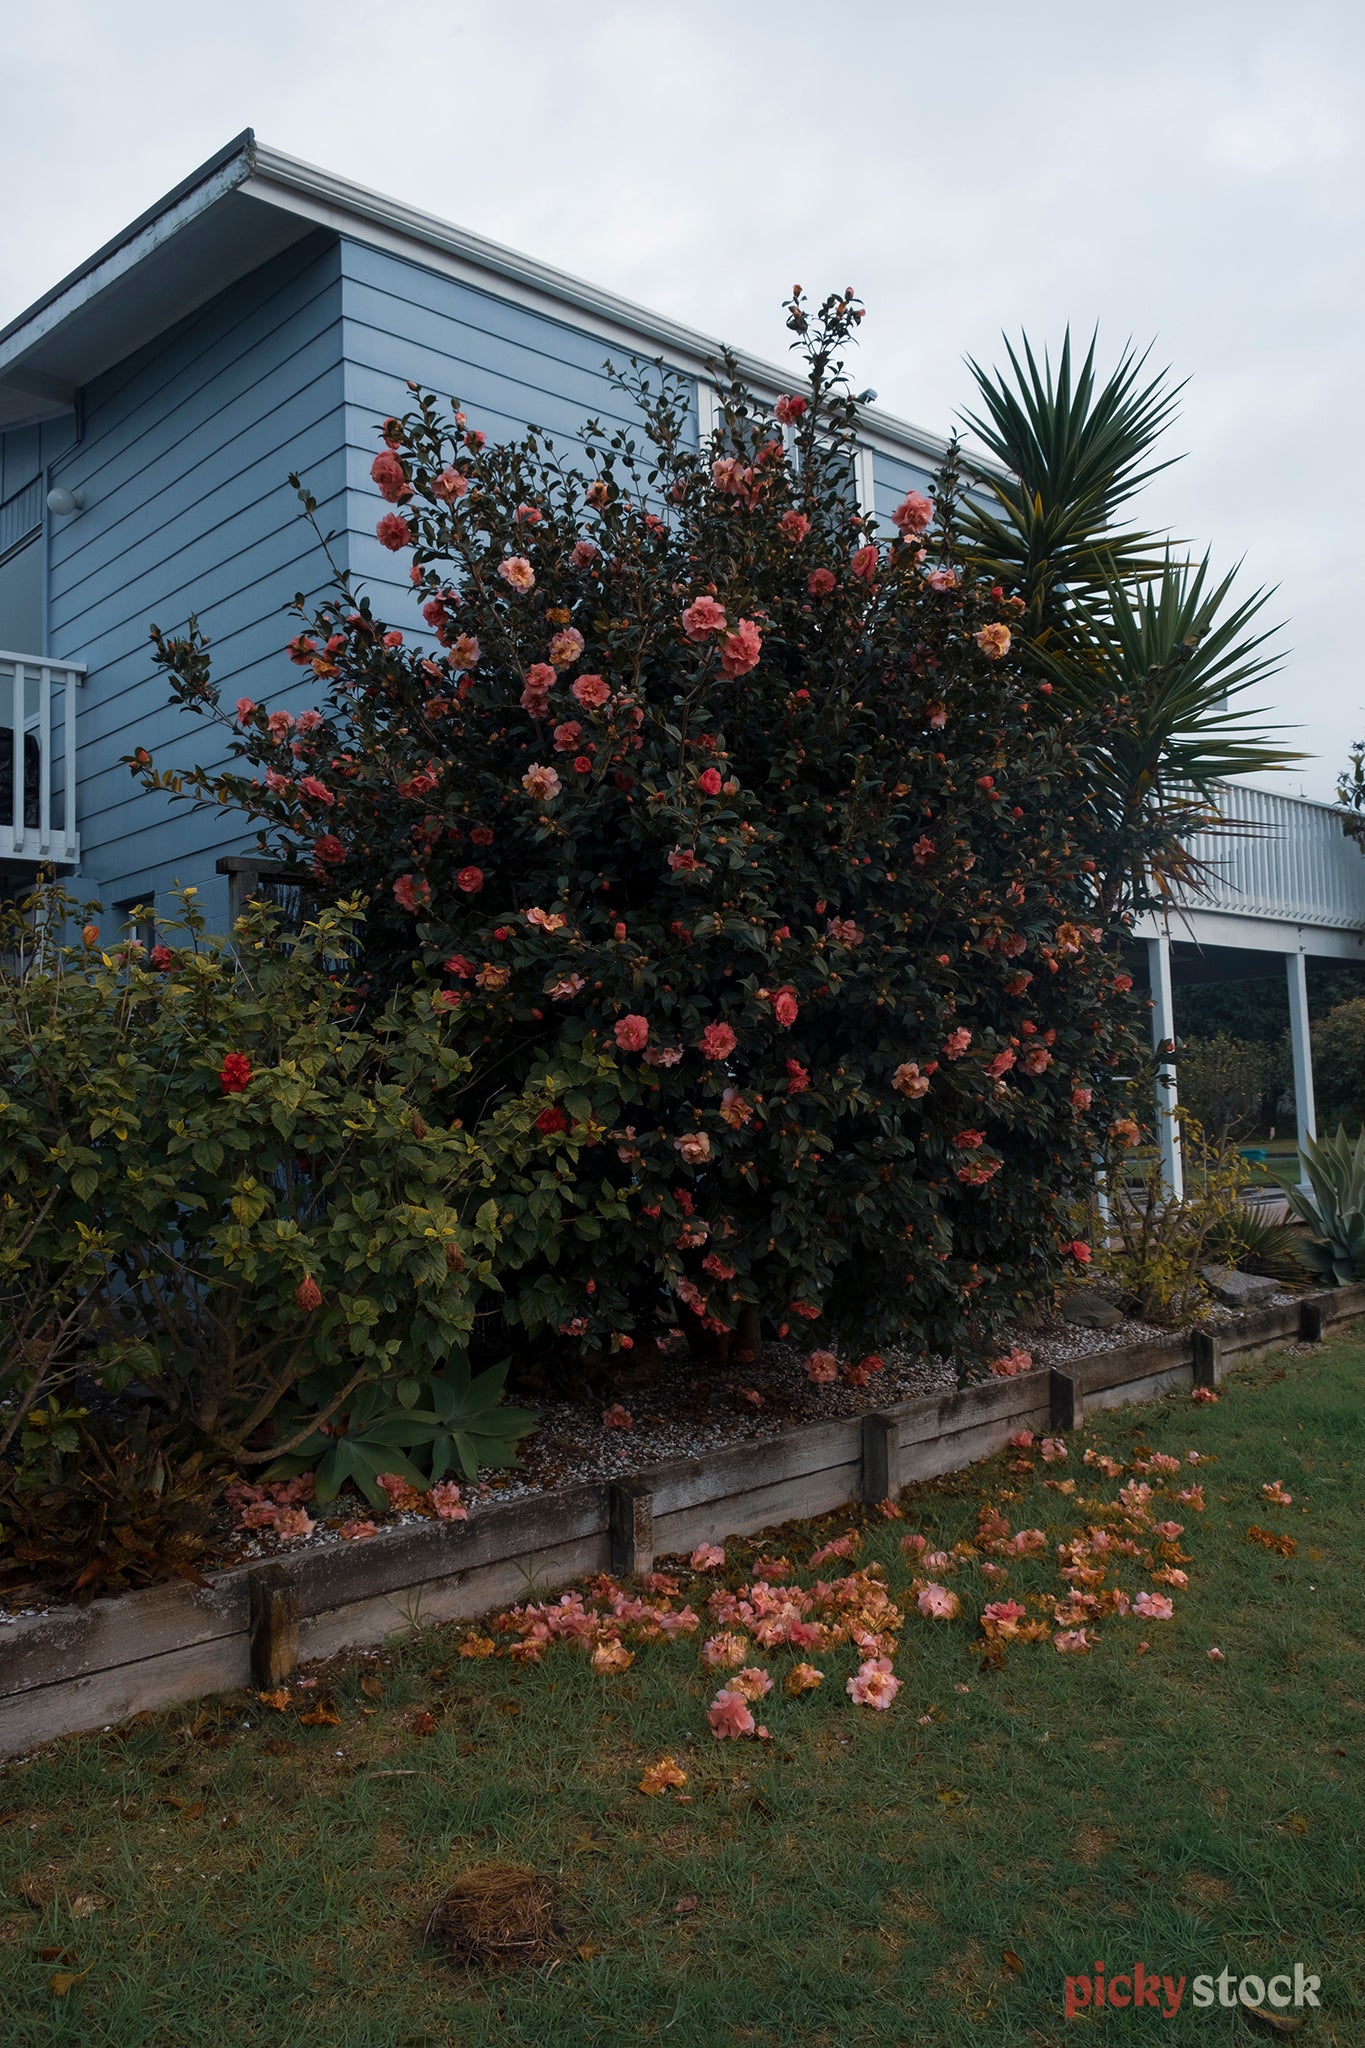 Pink Camellia flowers bloom against the green leaves, against a light blue weatherboard house.